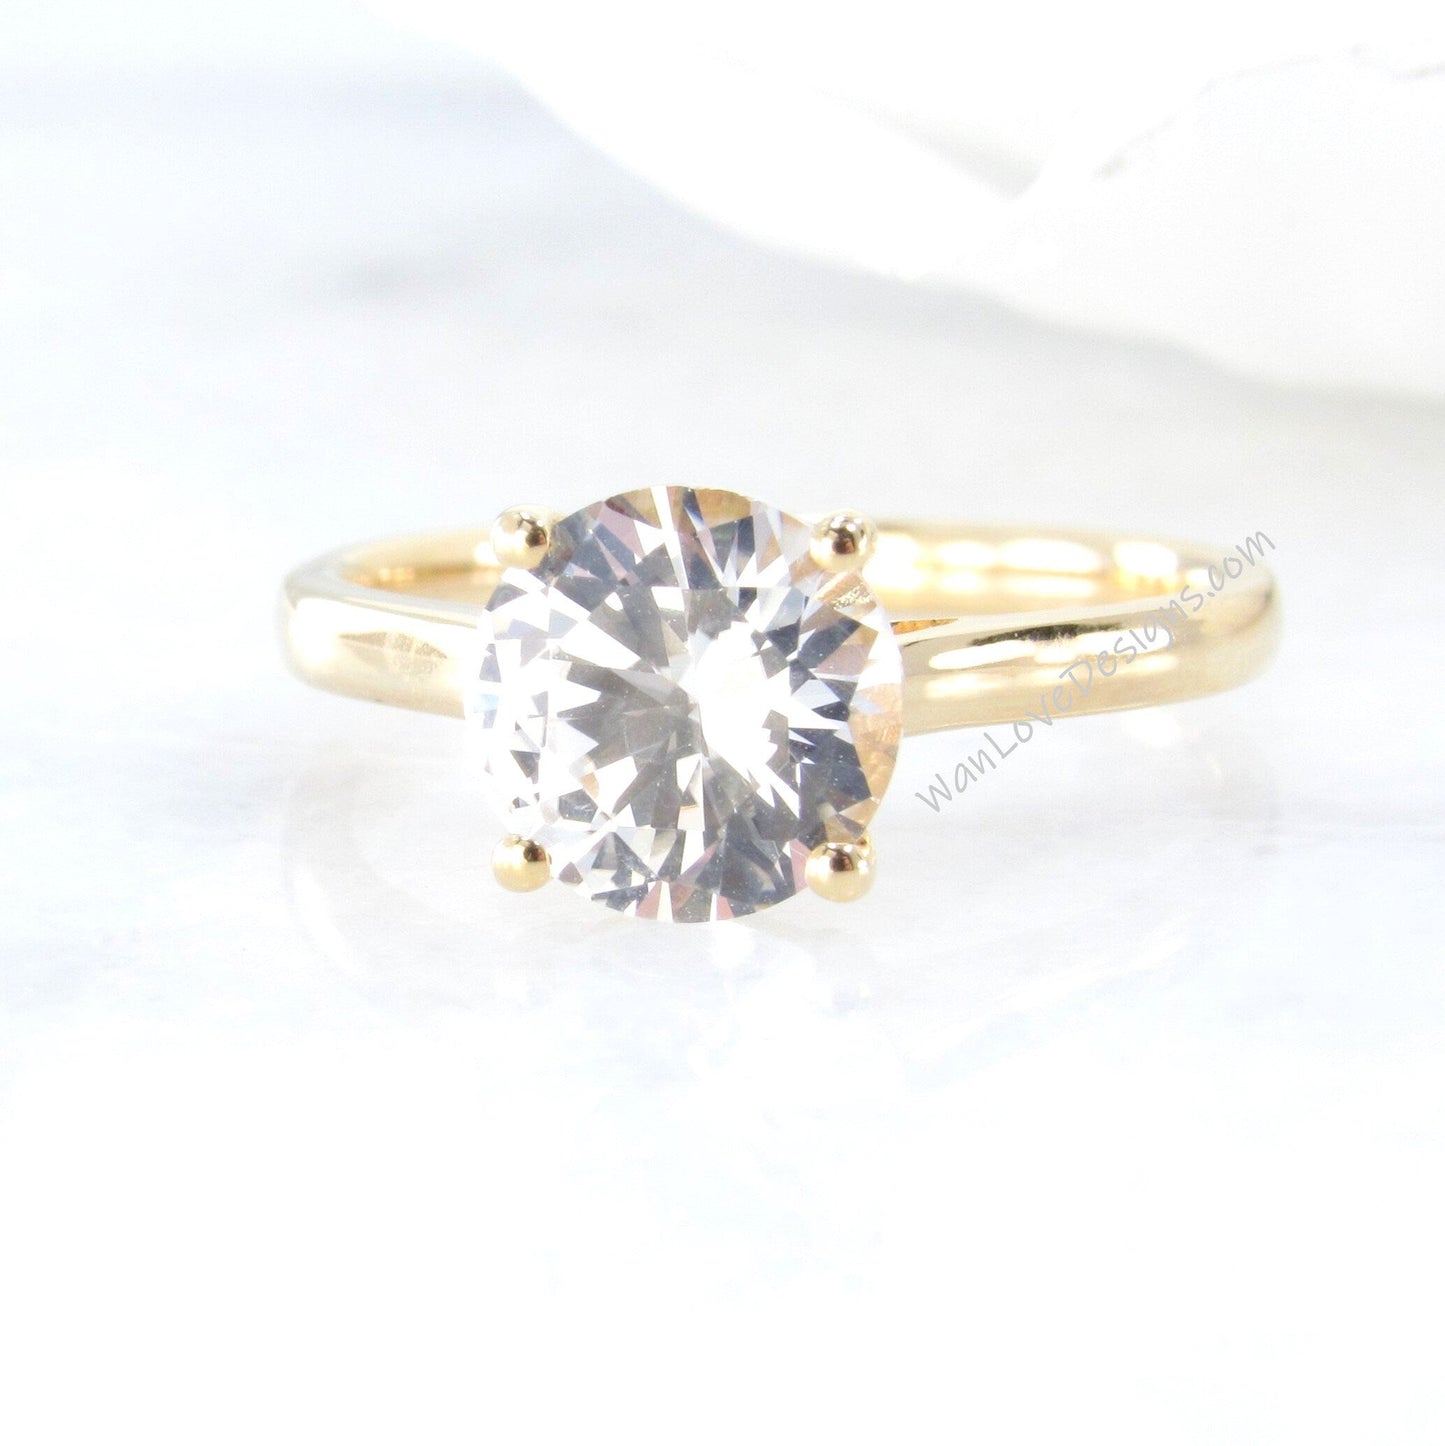 2ct 8mm 14kt Yellow Gold Round White Sapphire Four-Prong Engagement Ring, White Sapphire Round Solitaire Ring, Ready to Ship Gold Ring Wan Love Designs